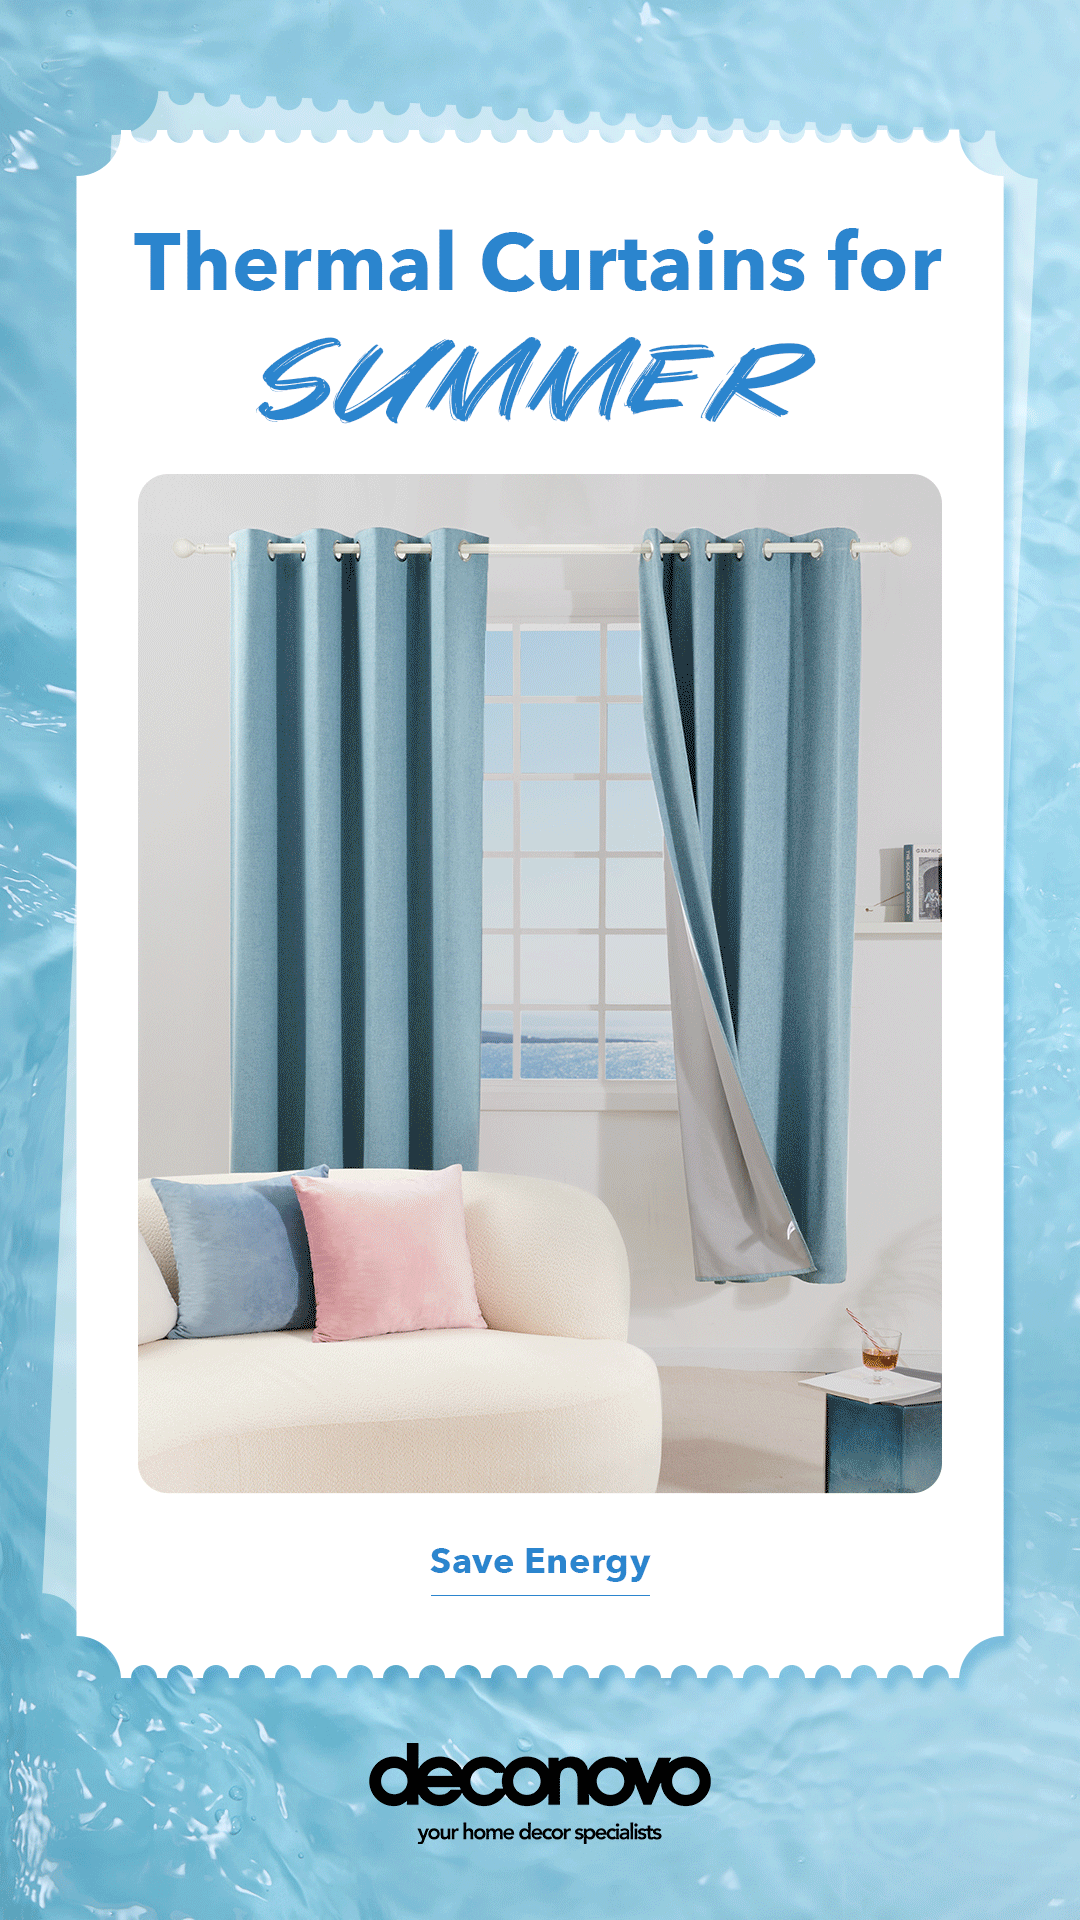 Summer Thermal Curtains by Deconovo